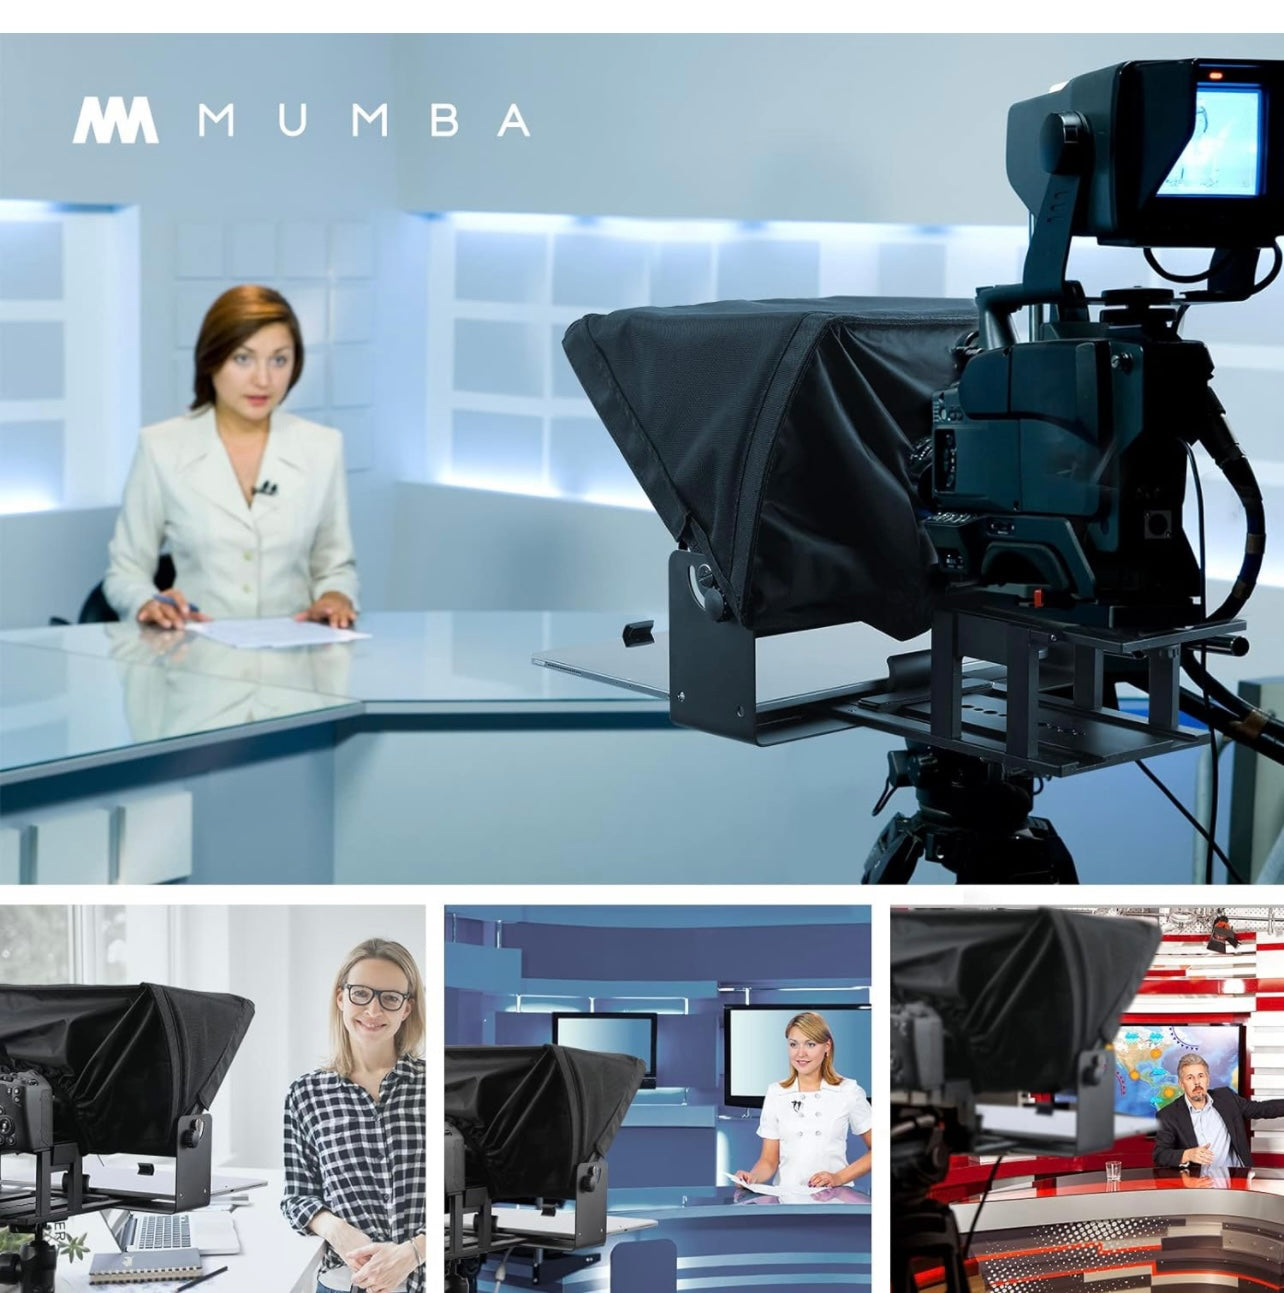 Mumba D15 Large Teleprompter for Camera, 15" Beam Splitter 70/30 Glass, No Assembly Required, All Aluminum Alloy Body with Waterproof Tote, Content Creator kit and Live Streaming Equipment